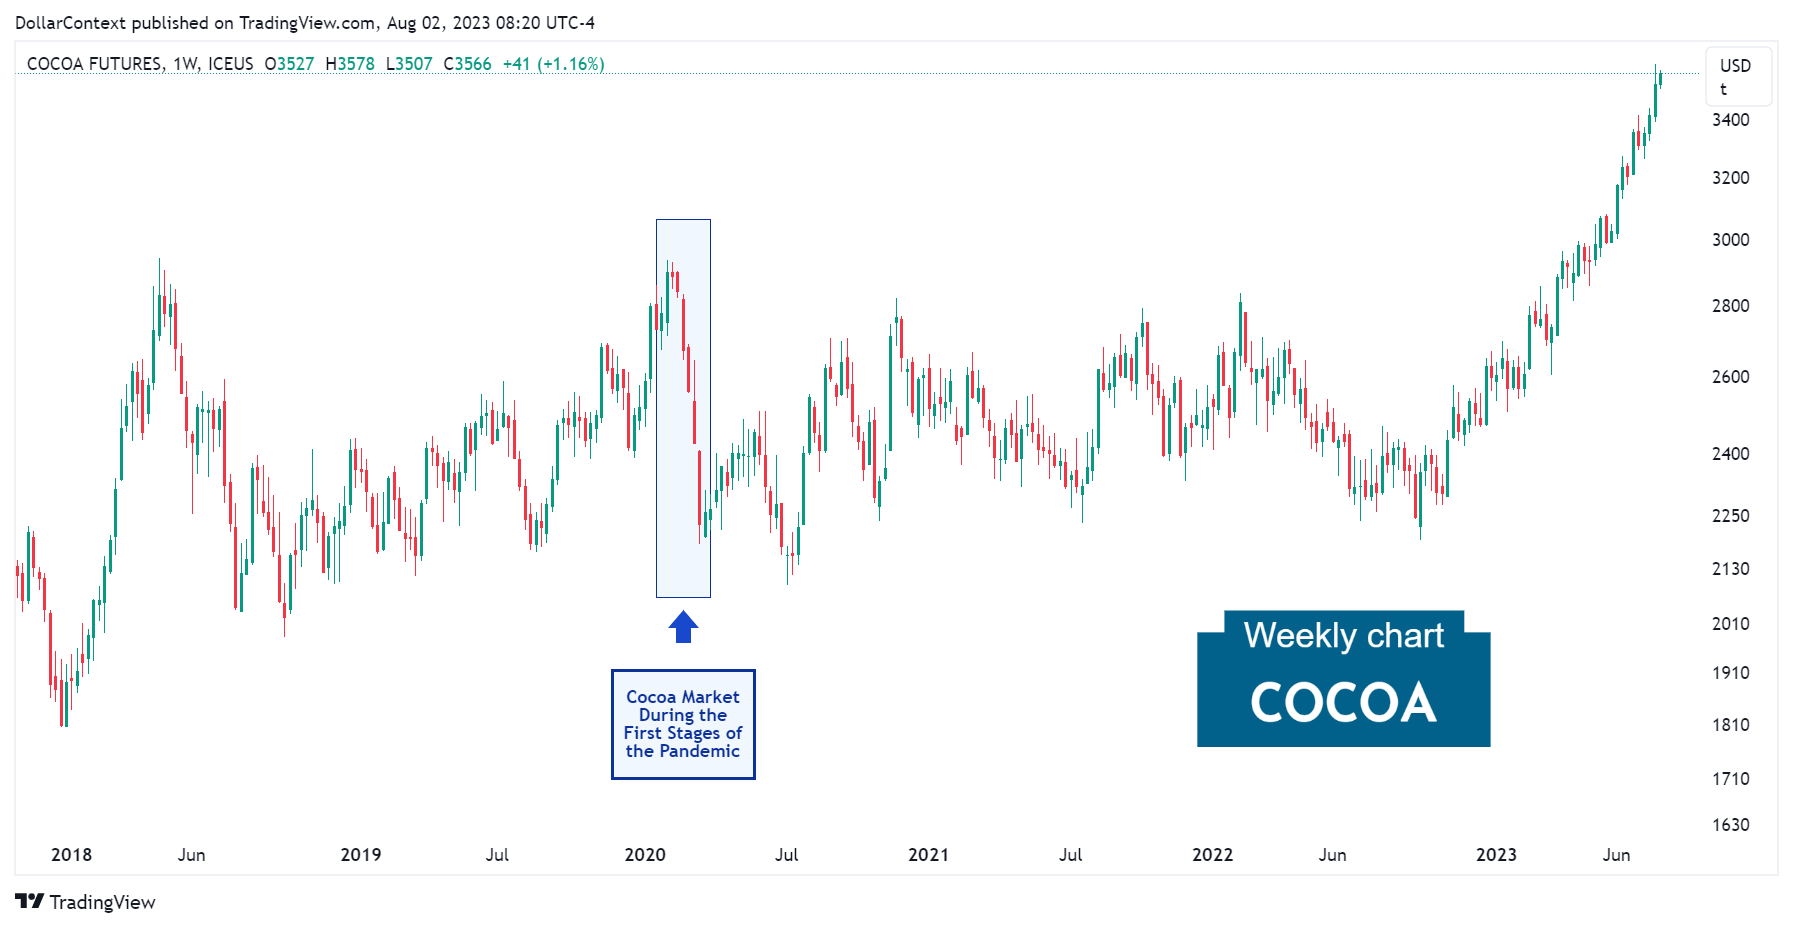 Cocoa Prices During the First Phase of the Pandemic